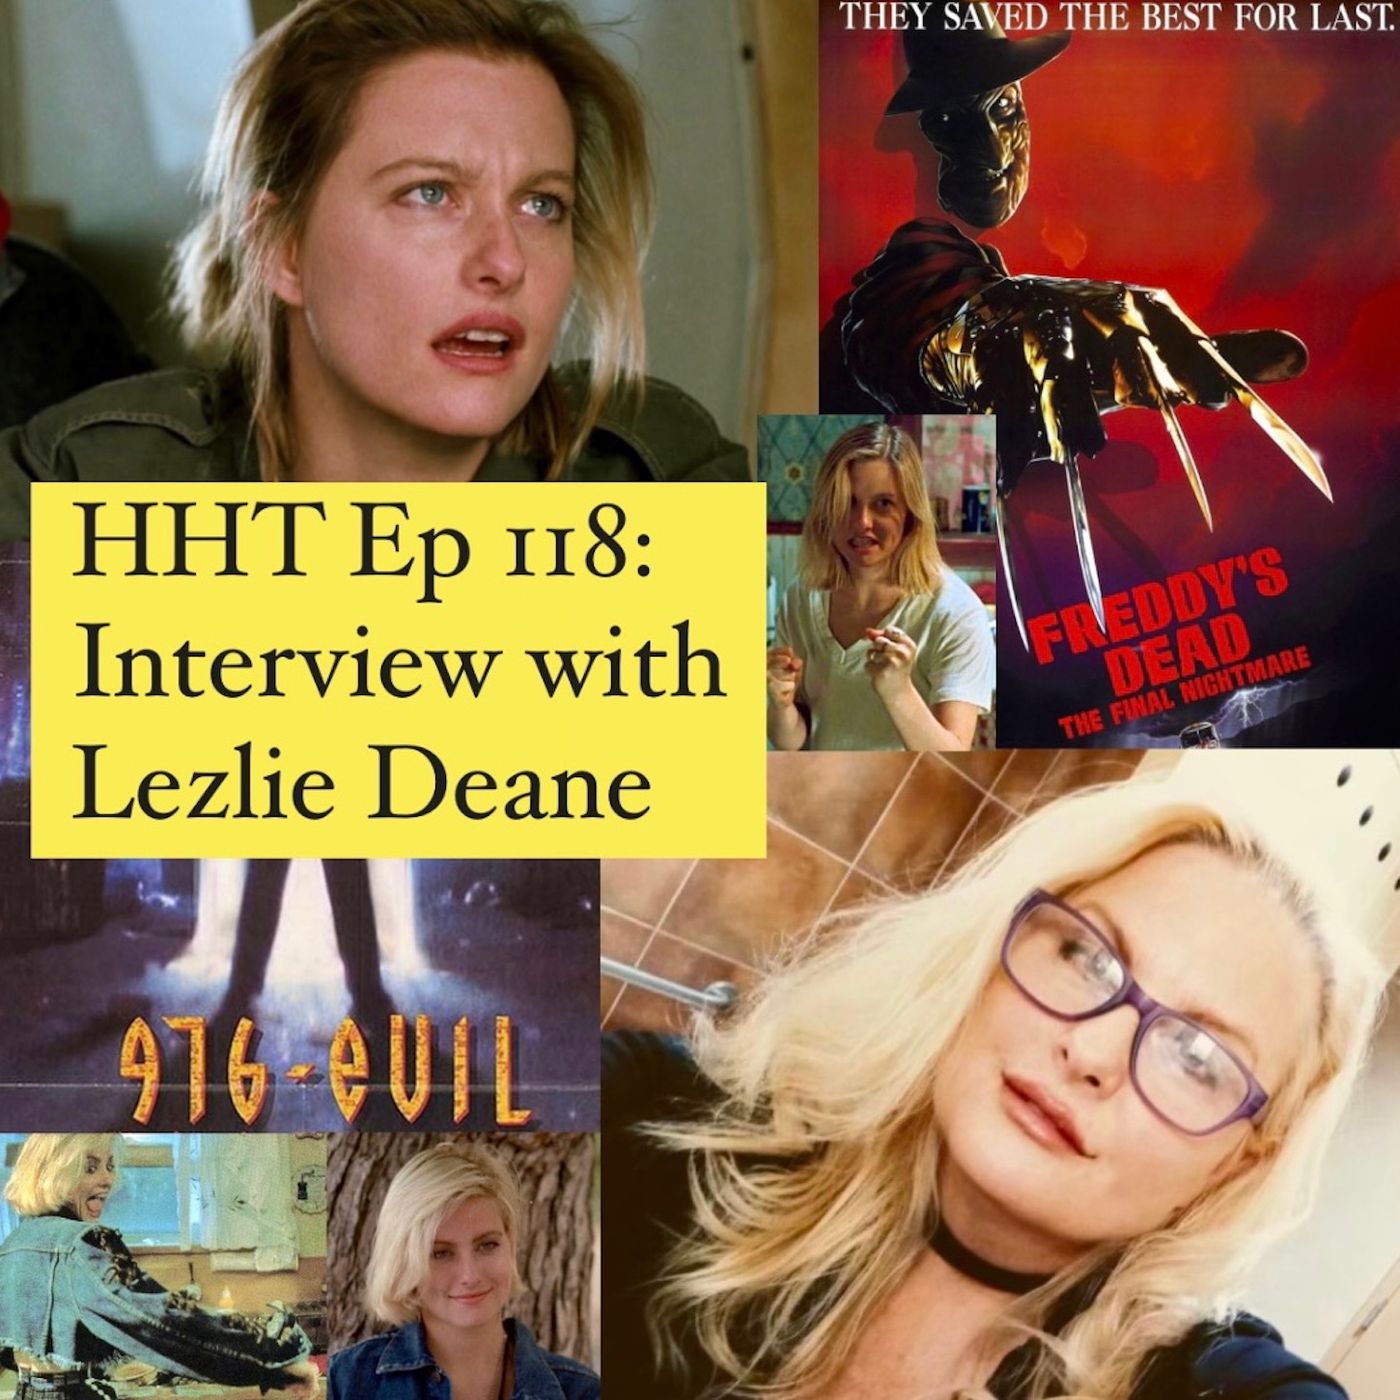 Ep 118: Interview w/Lezlie Deane from “Freddy’s Dead” & “976-EVIL”